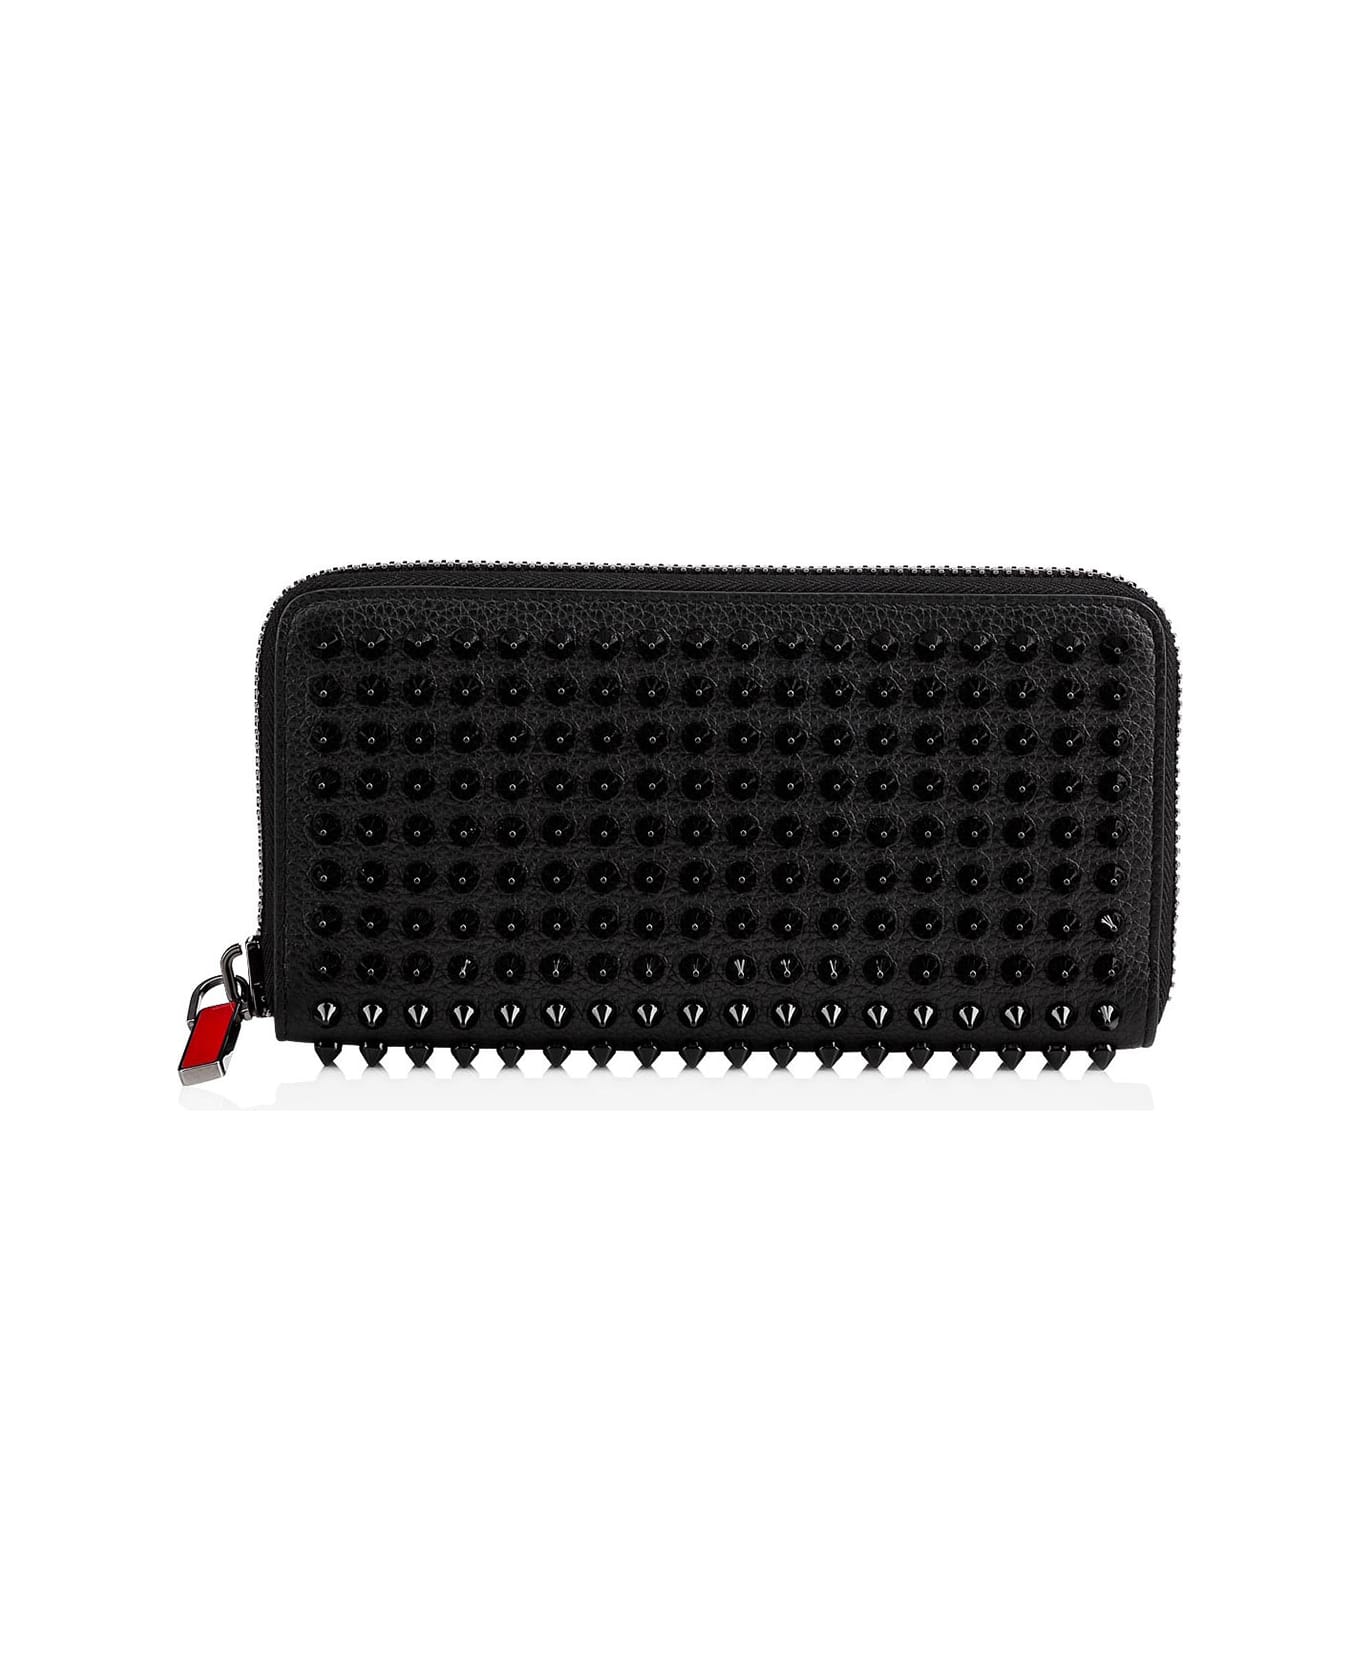 Christian Louboutin Leather Panettone Wallet With Spikes - Black